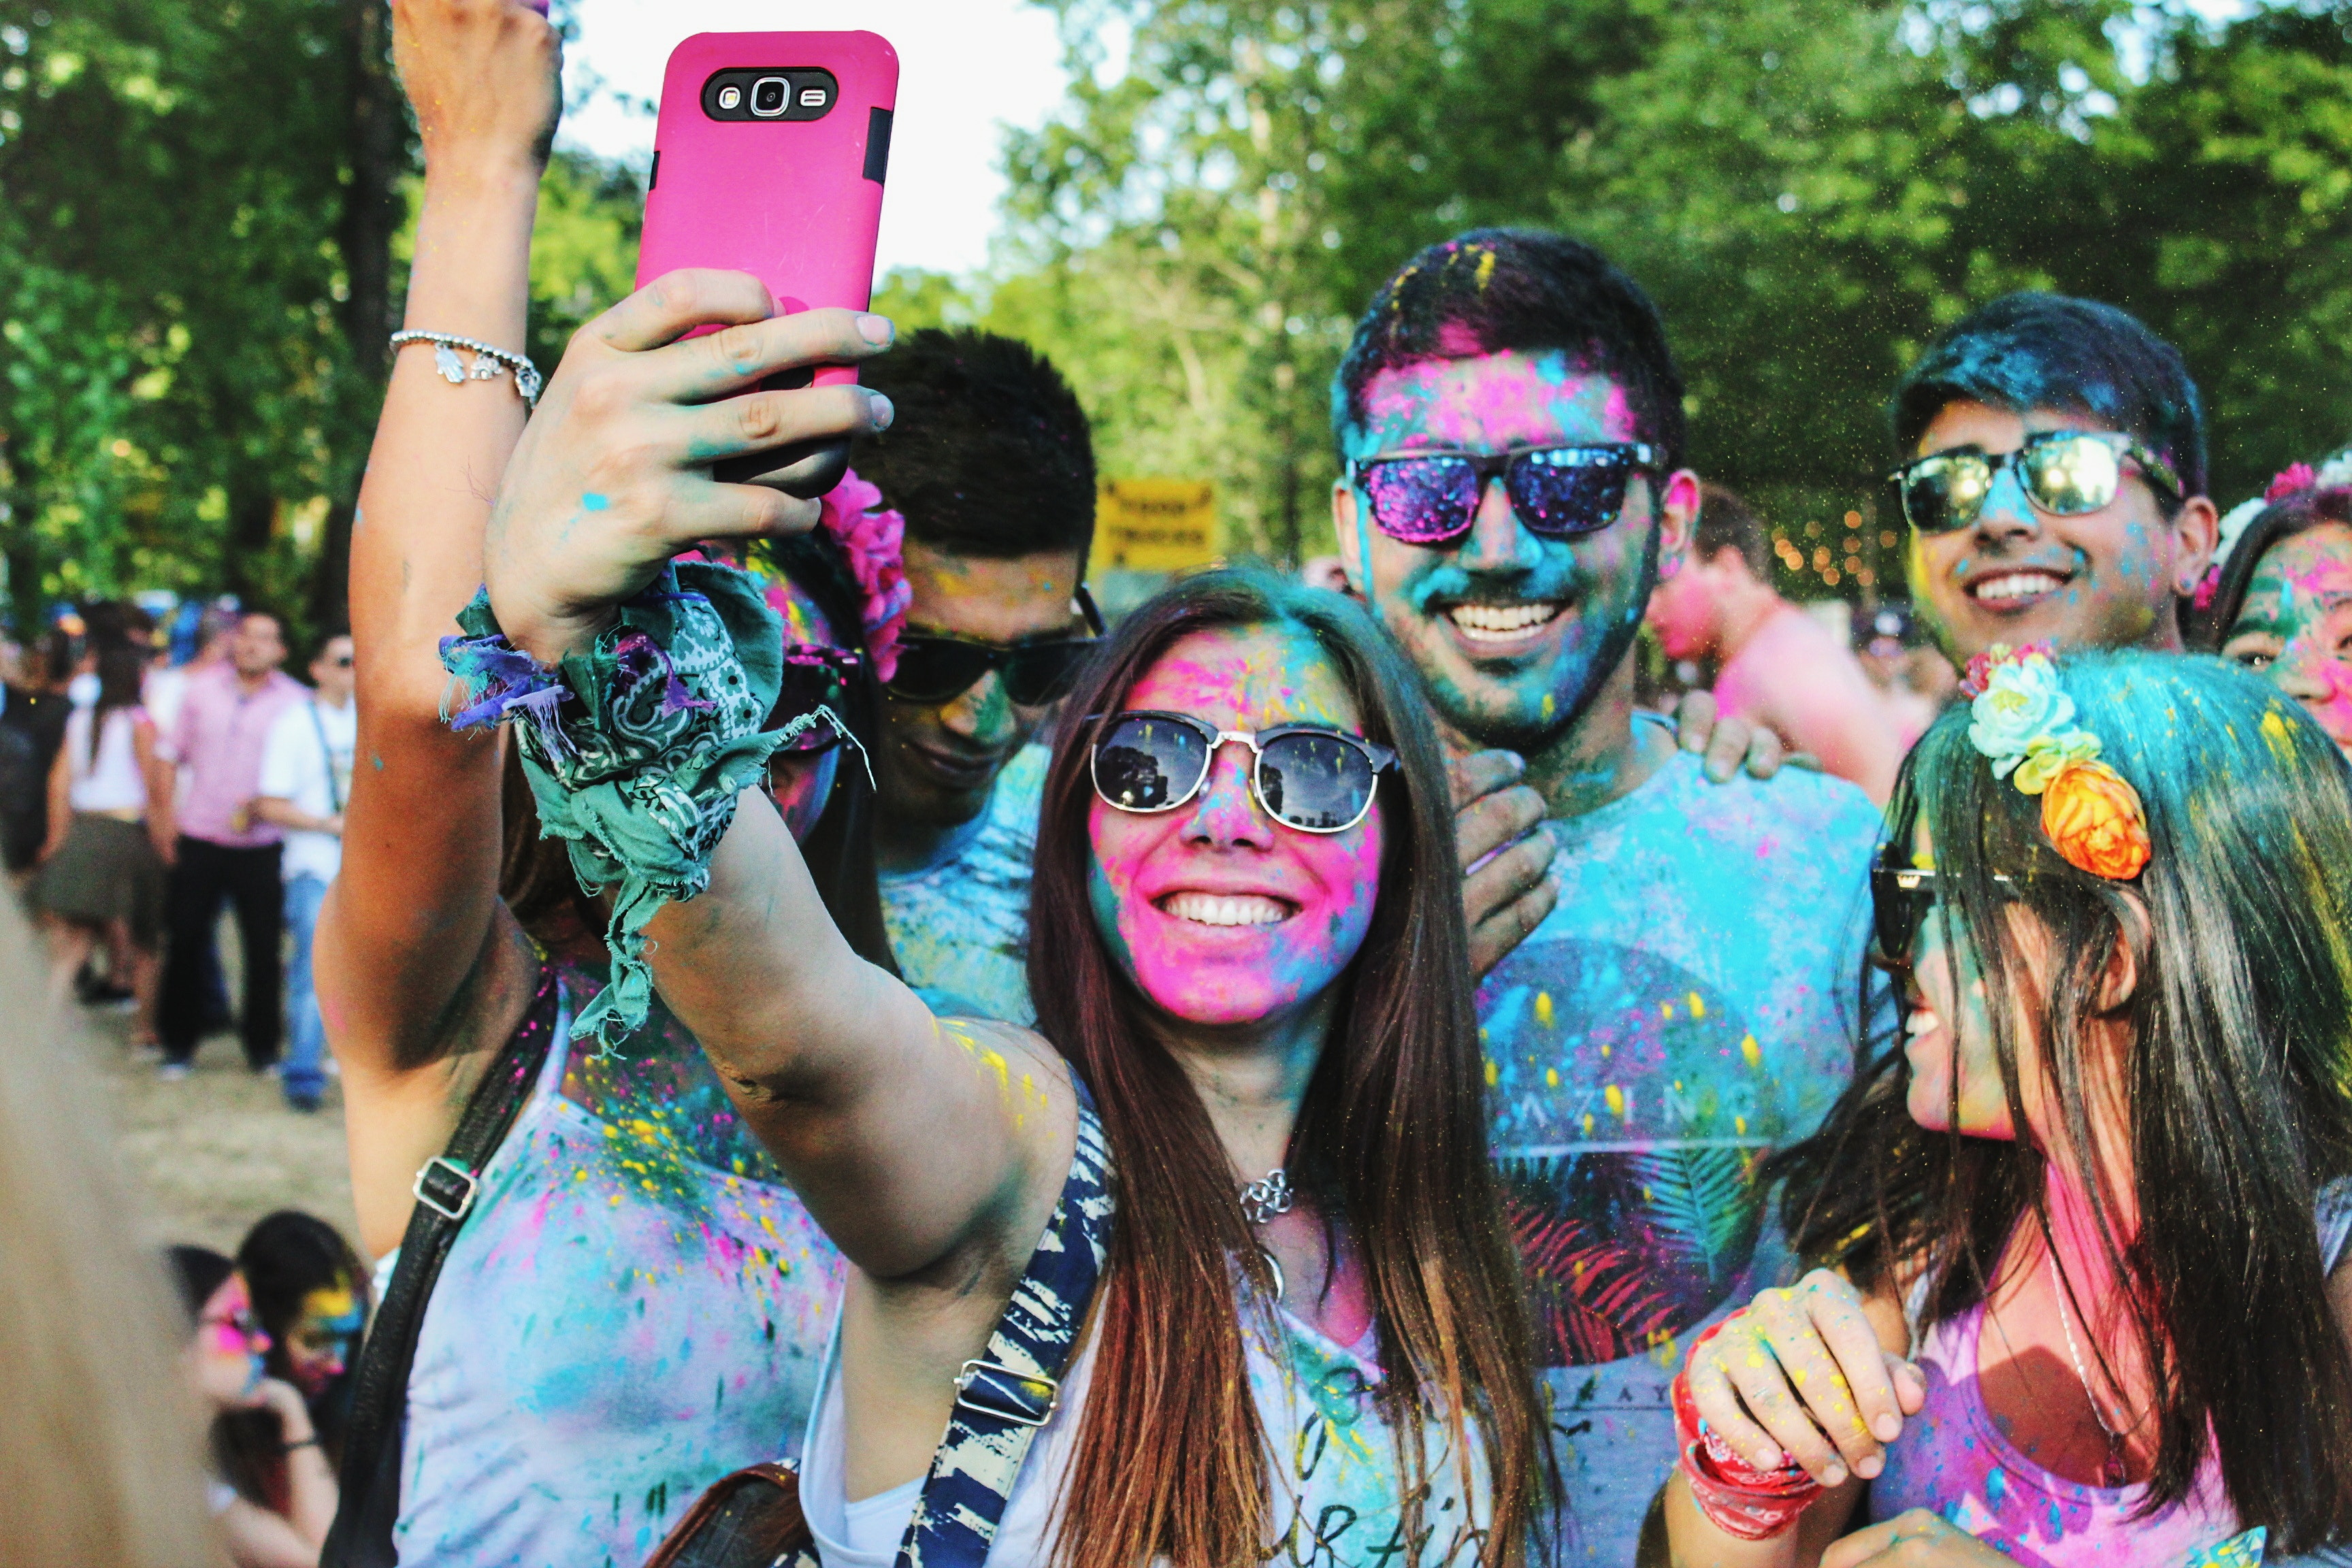 Group covered in paint smiling and taking a picture on a cell phone.